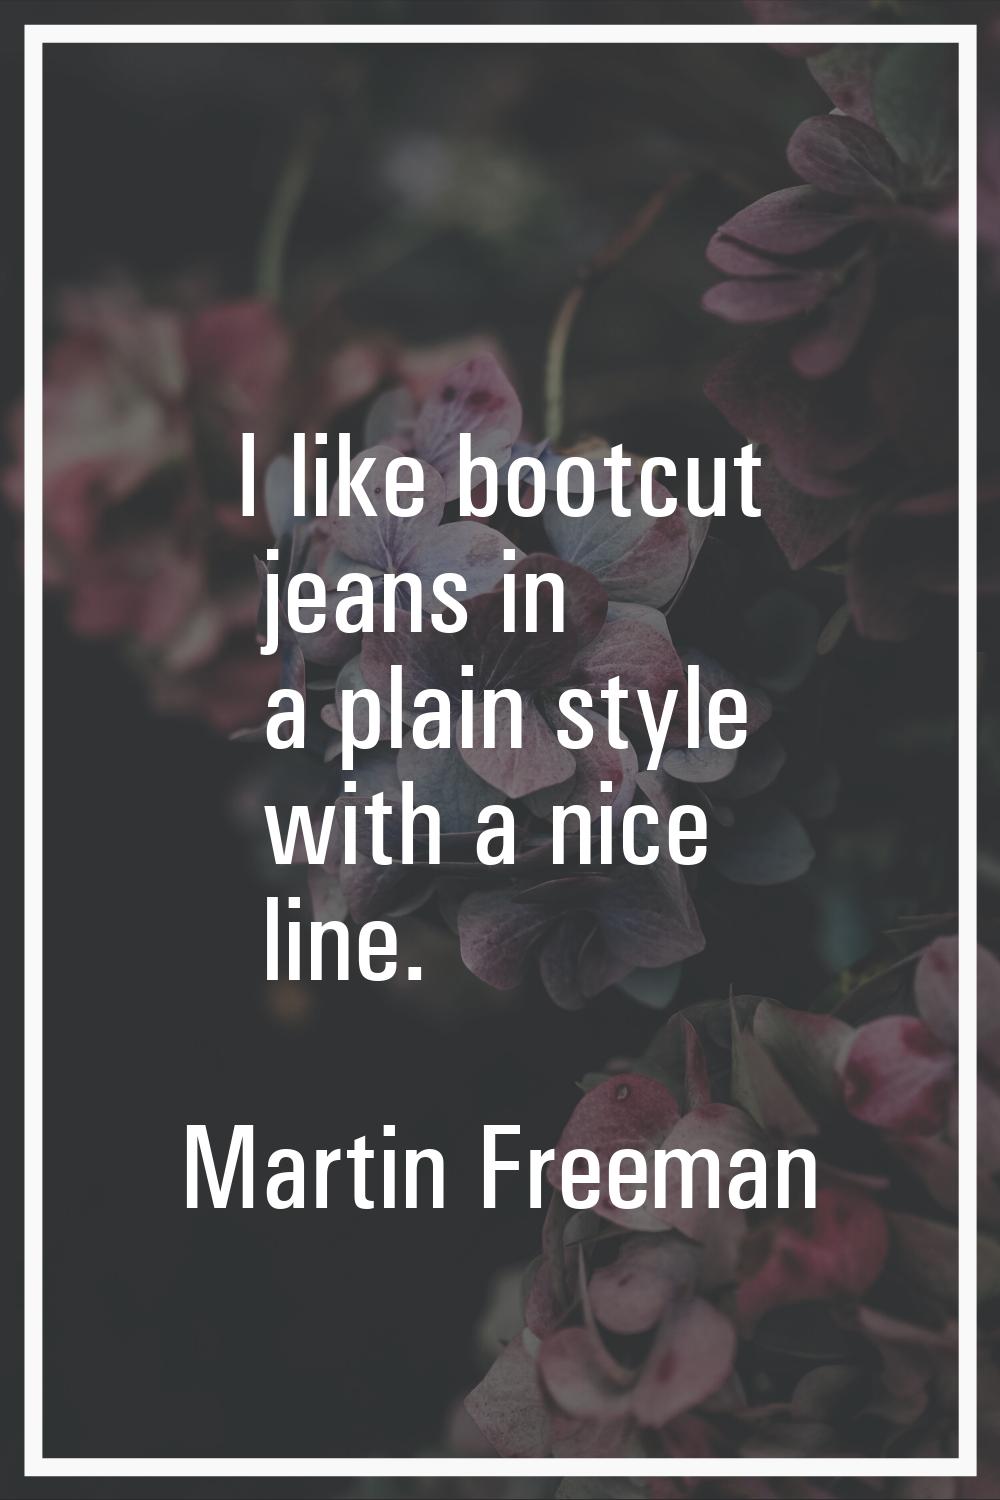 I like bootcut jeans in a plain style with a nice line.